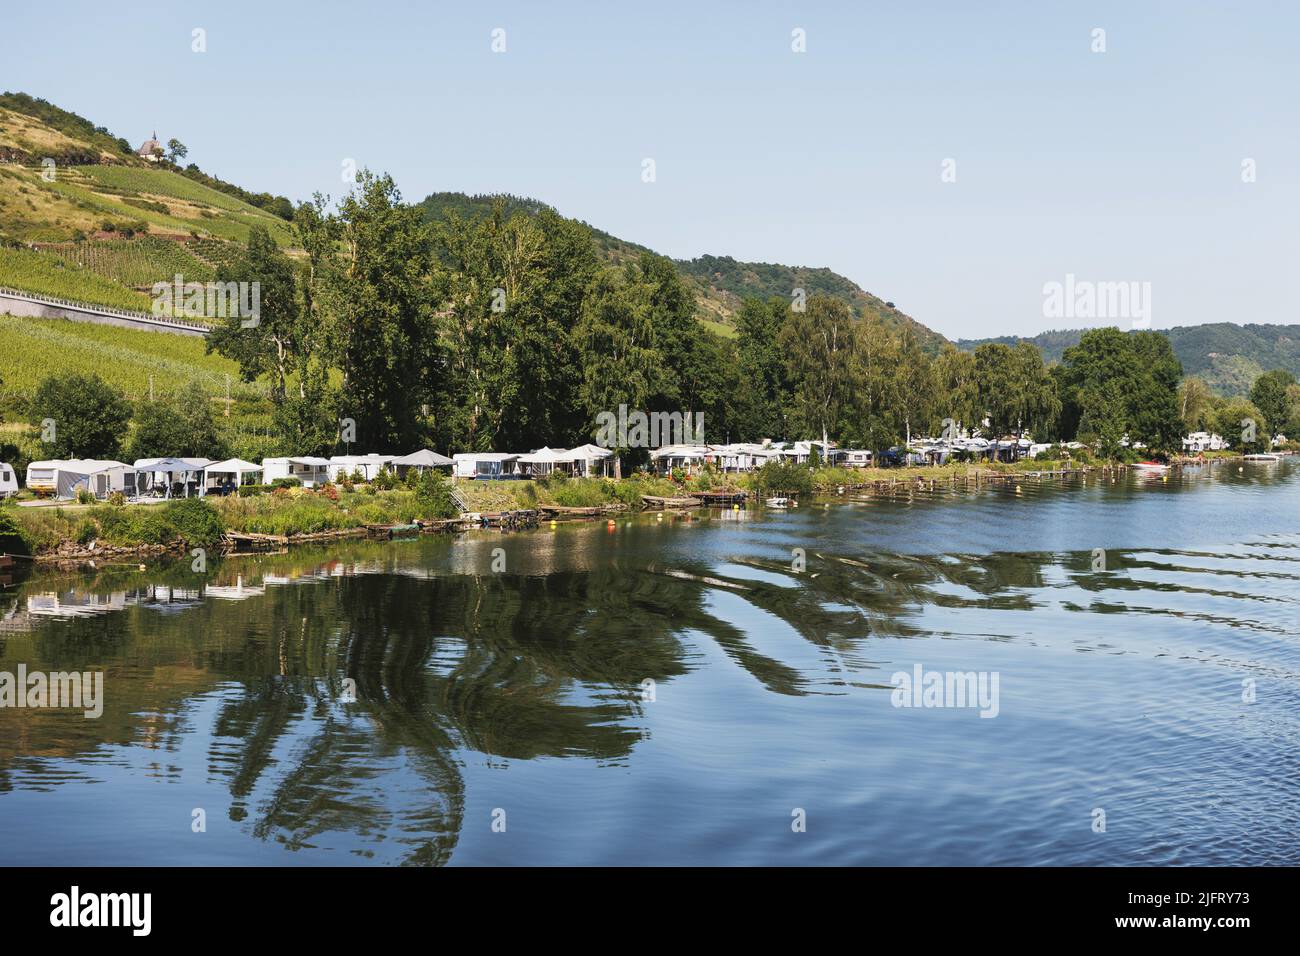 Camping, wild camping in tents and caravans on the banks of the River Rhine in Germany. Tents are reflected in the water. Stock Photo